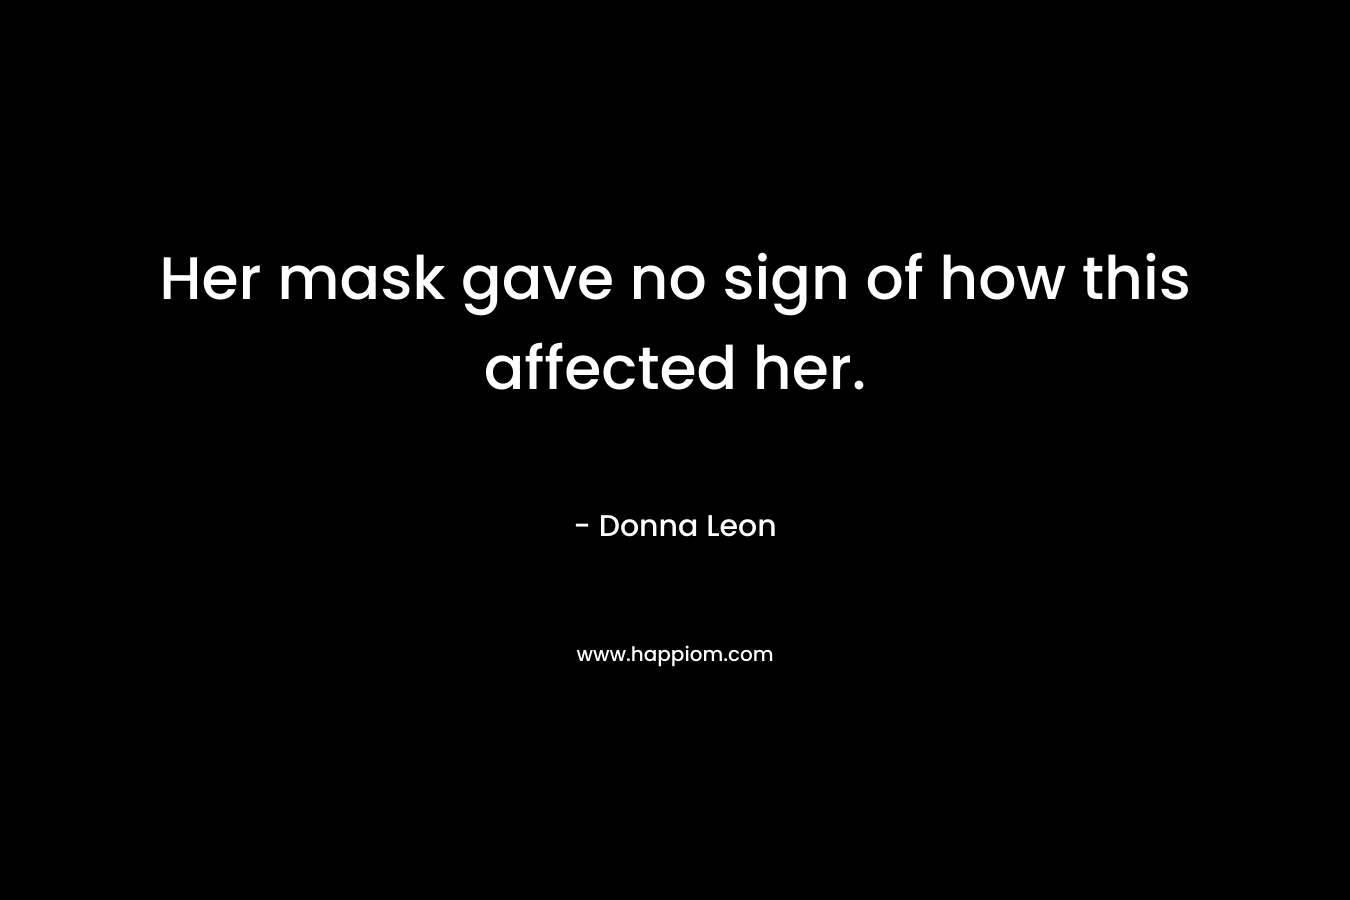 Her mask gave no sign of how this affected her.